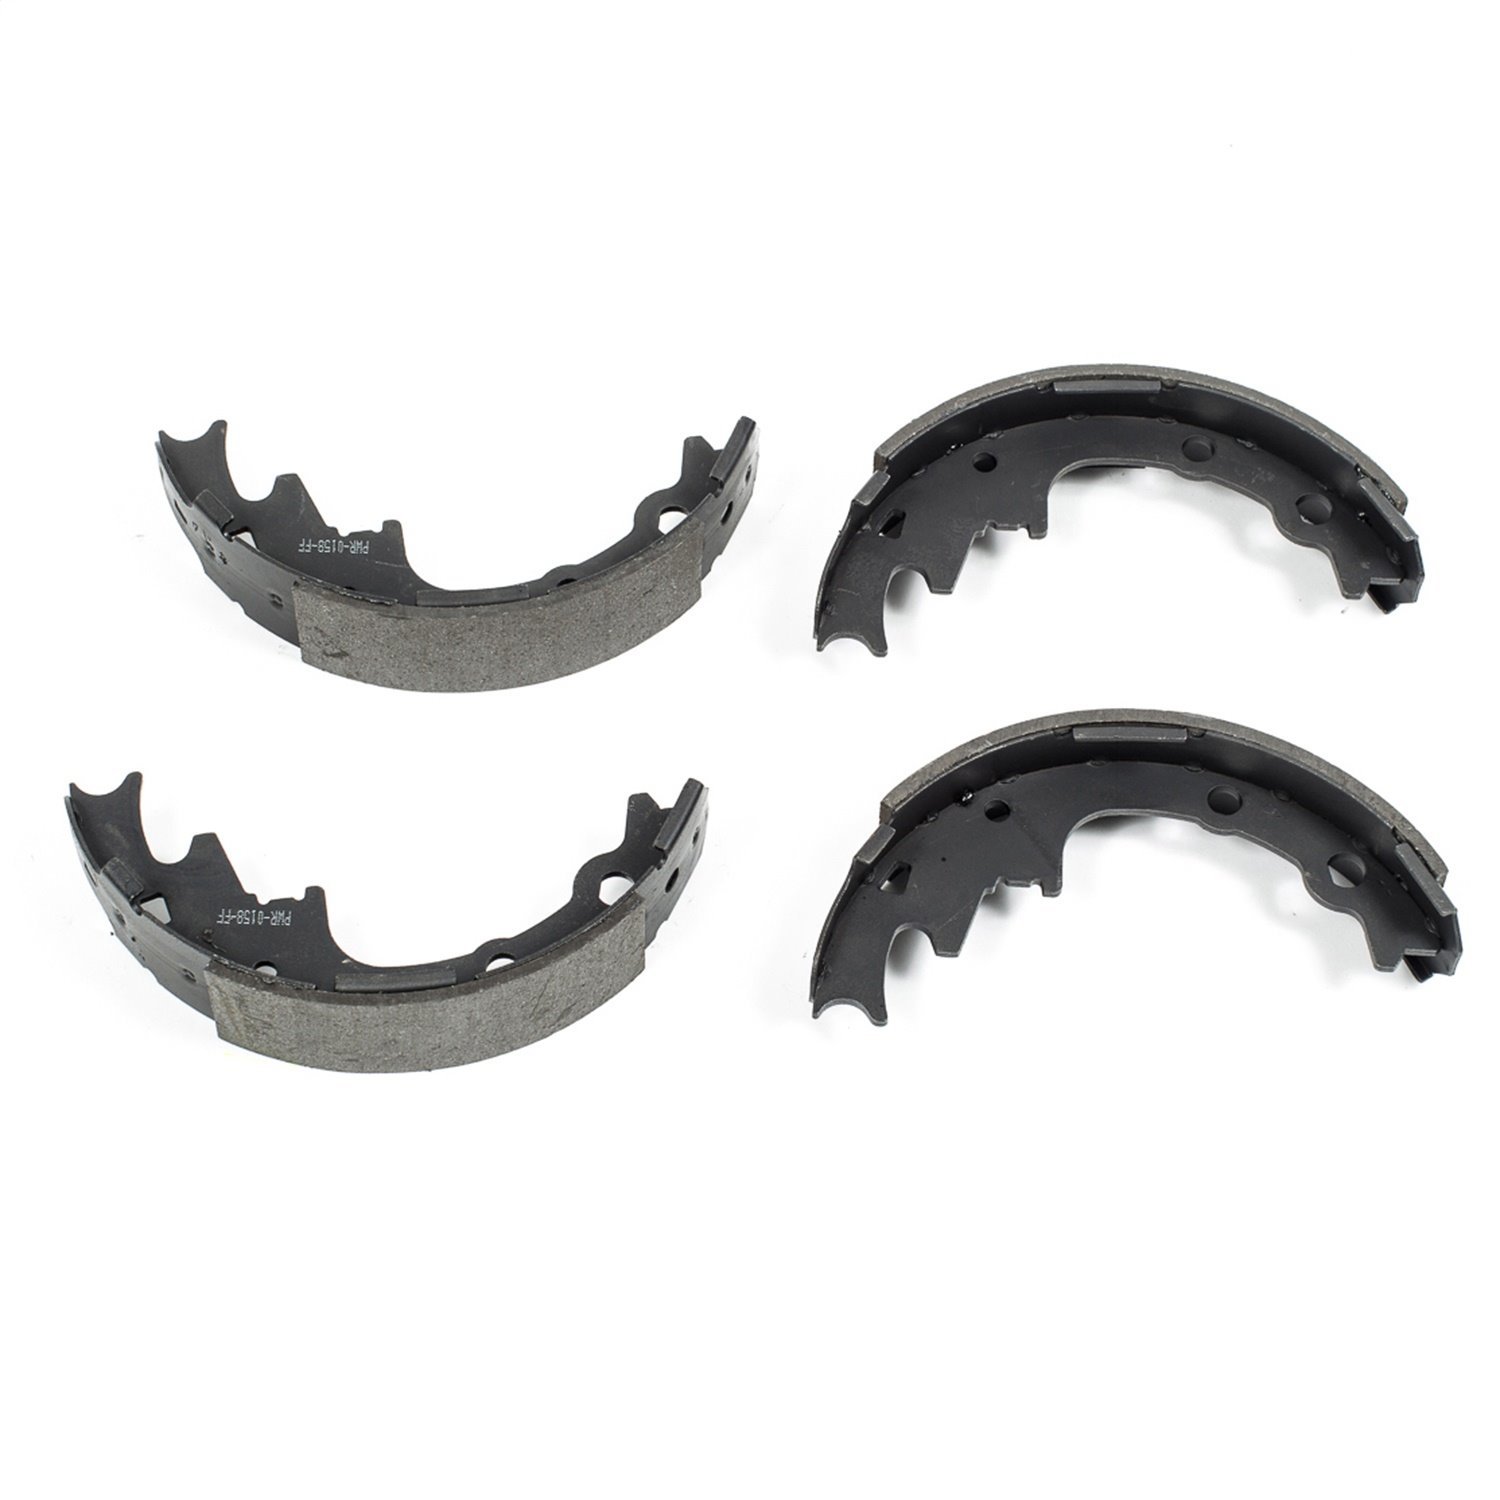 NEW SHOE B569 4 Rear 1989-86 FORD Aerostar/1990-86 FORD Bronco II/1993 FORD Mustang/1992-87 FORD Mus